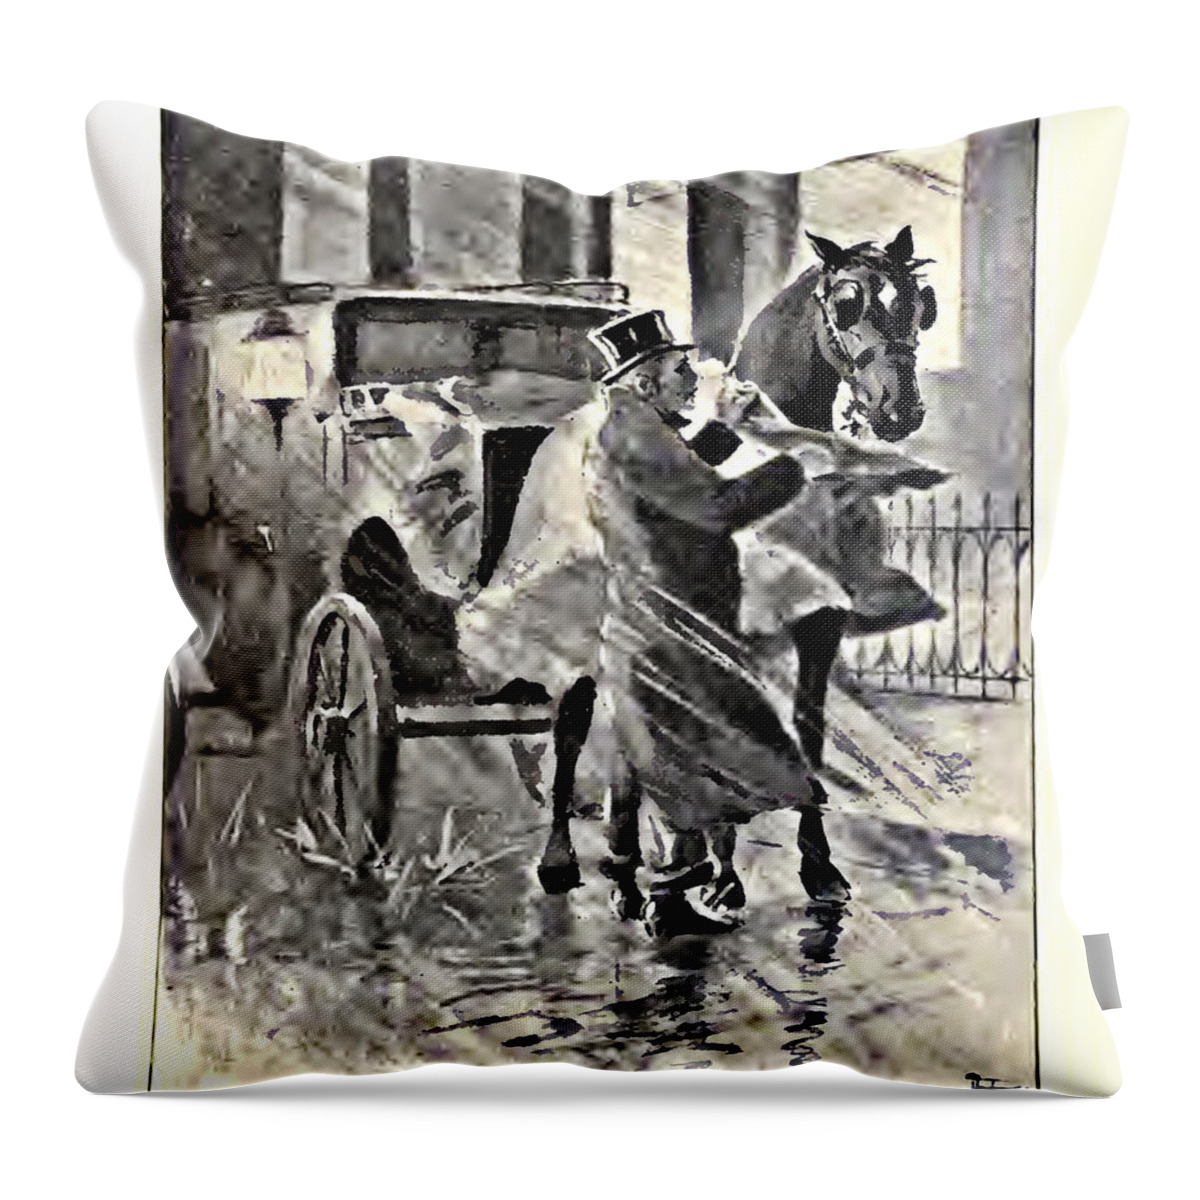 Black Beauty Throw Pillow featuring the digital art Cab Horse by Janice OConnor